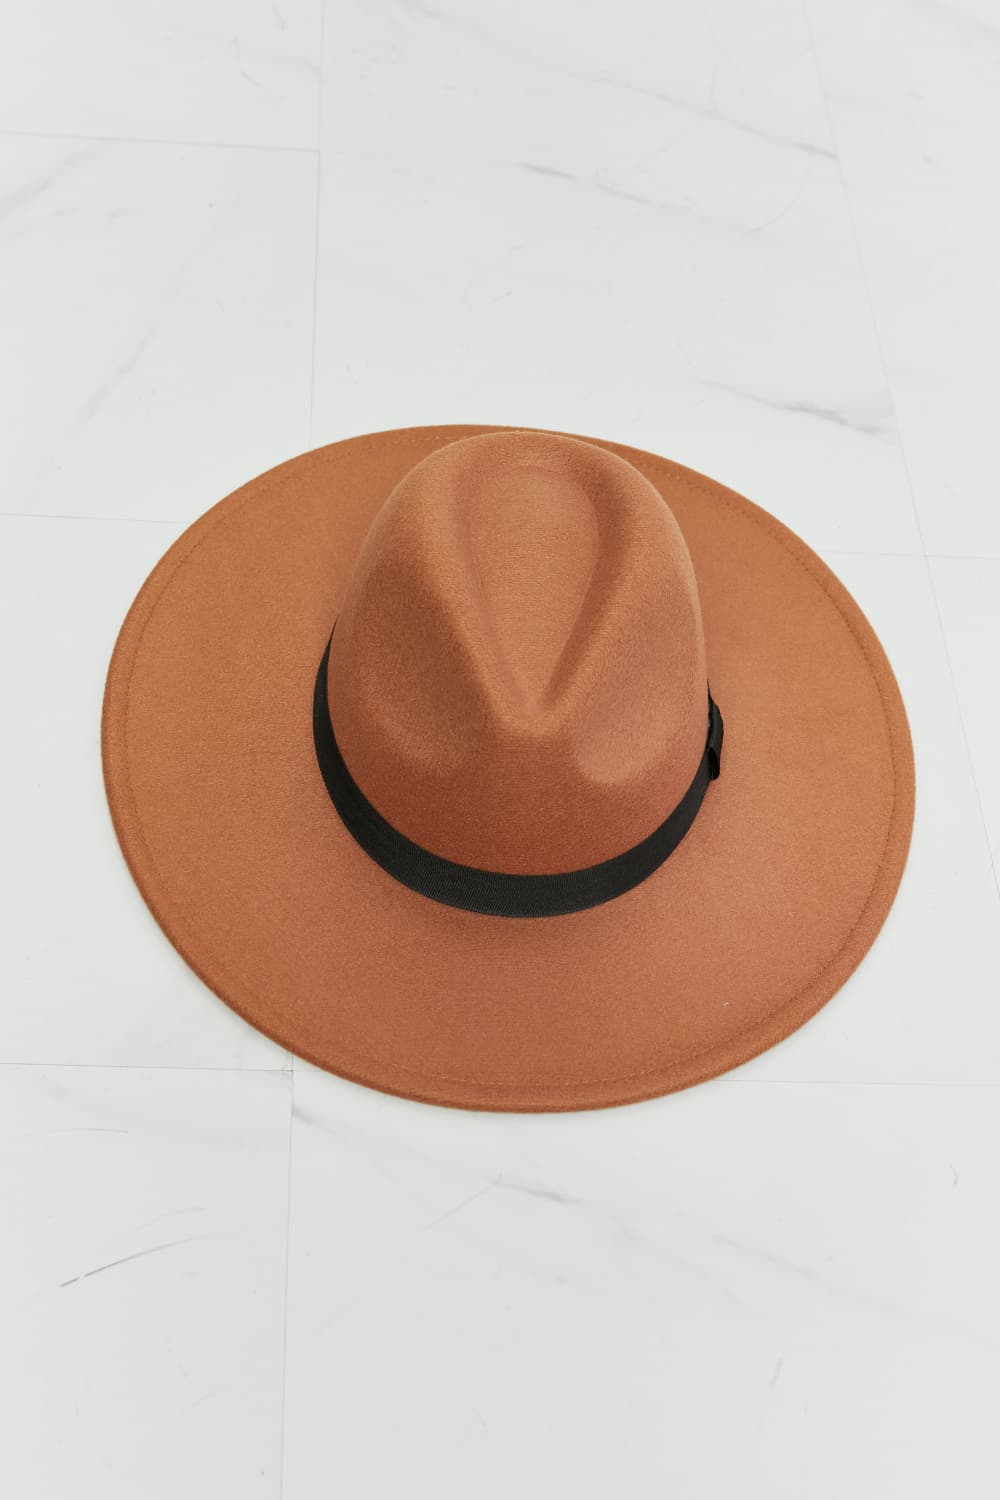 The Simple Things Fedora Hat